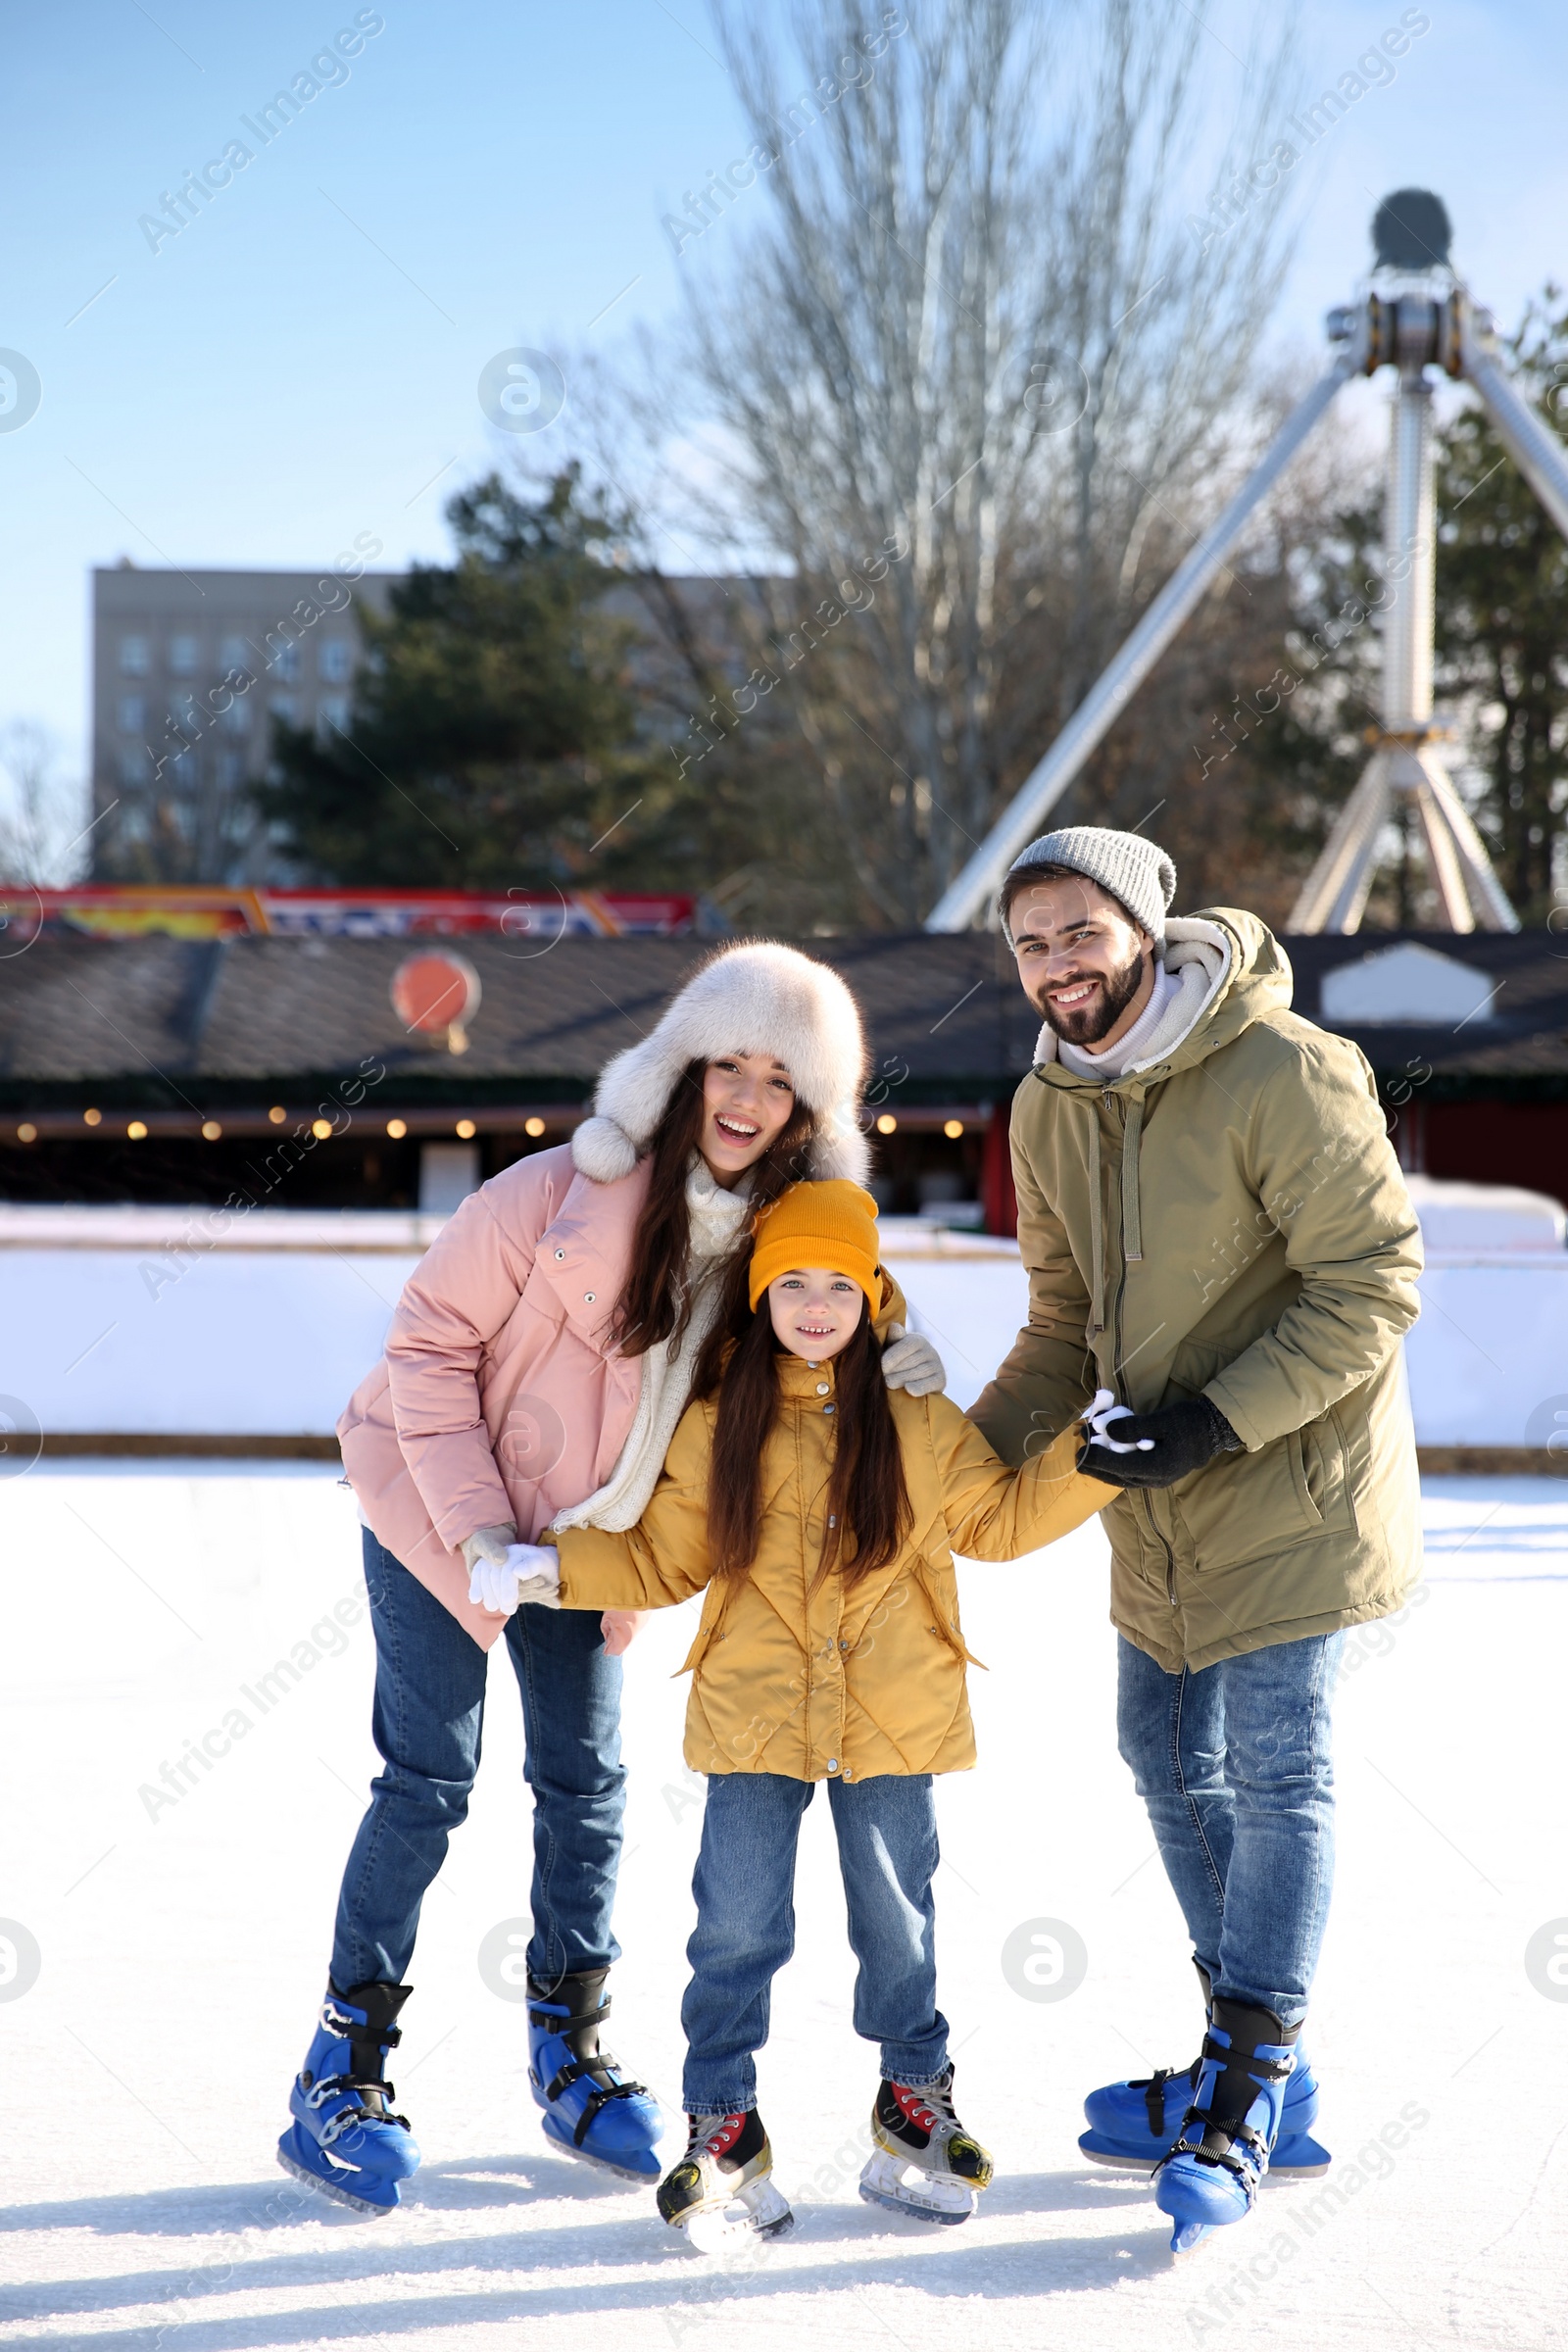 Image of Happy family spending time together at outdoor ice skating rink